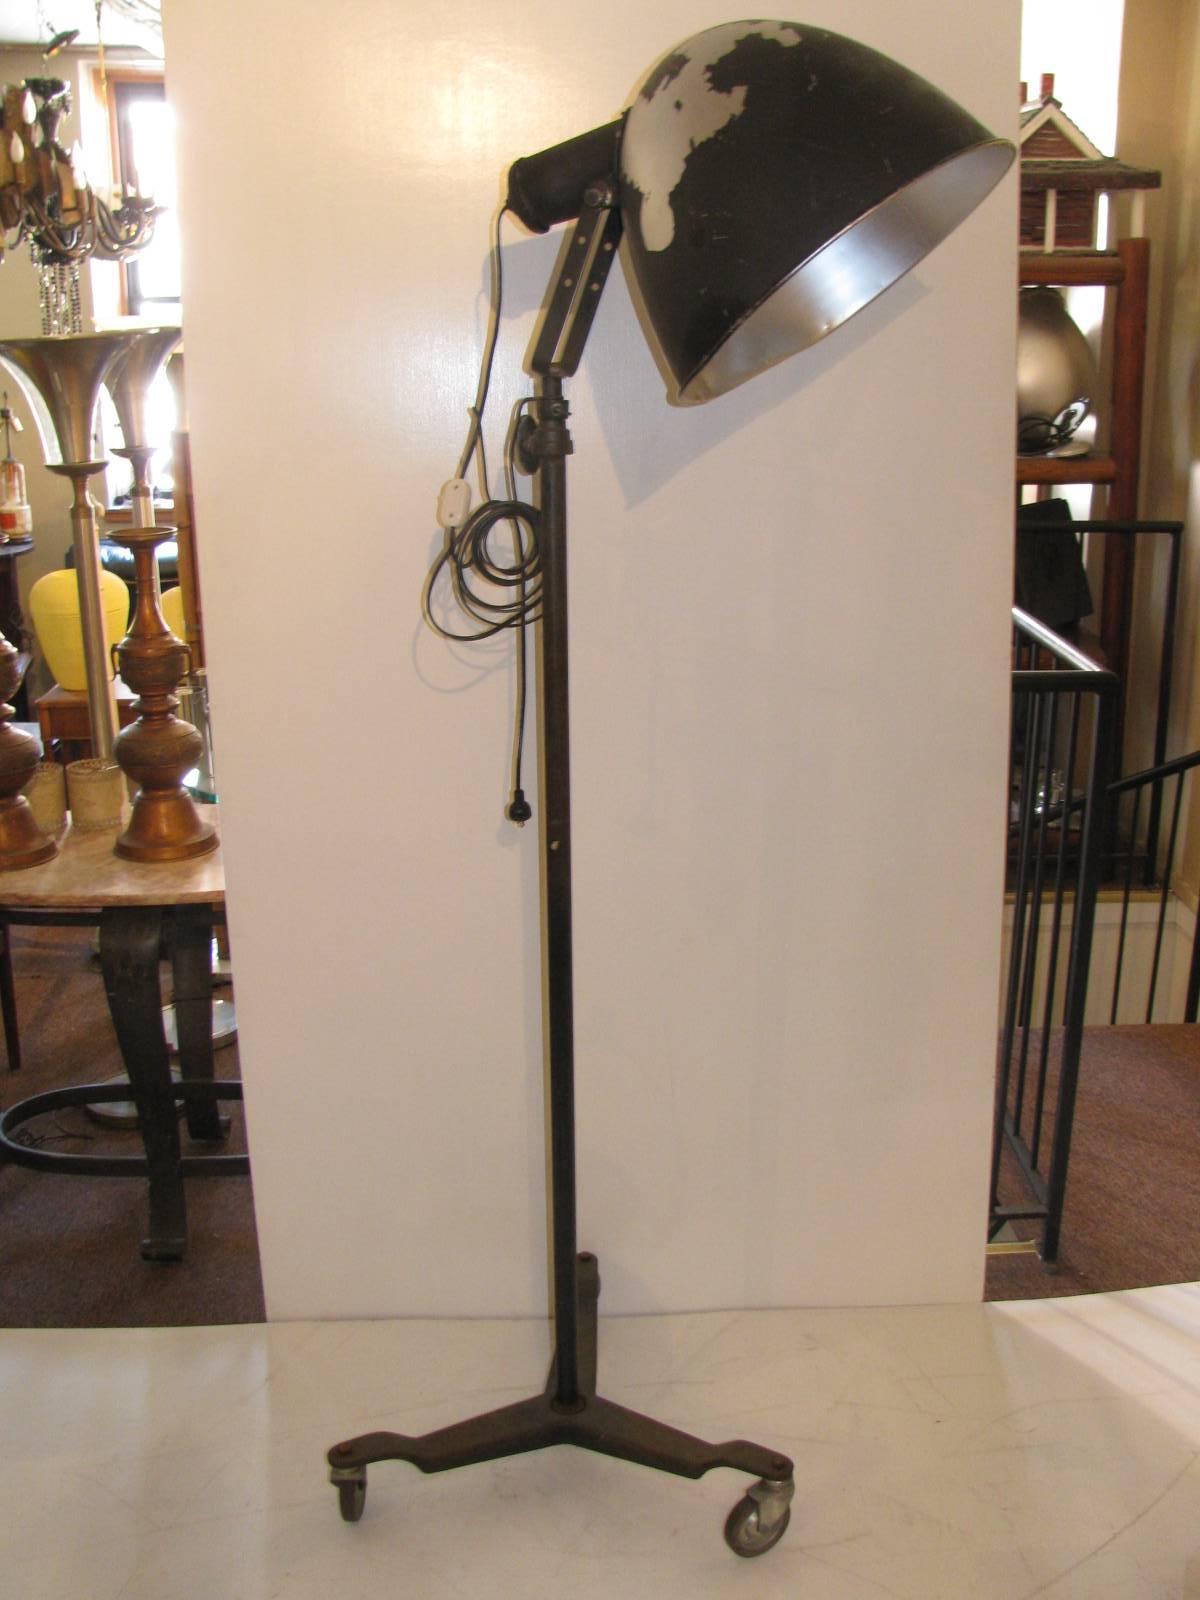 Tall Scoop Industrial lamp with three caster wheels for great mobility. From a movie set, television or a theatre production. Rewired. Adjustable shade will tilt and lock. Height adjusts up to ten feet tall. Disassembly for shipping. In excellent